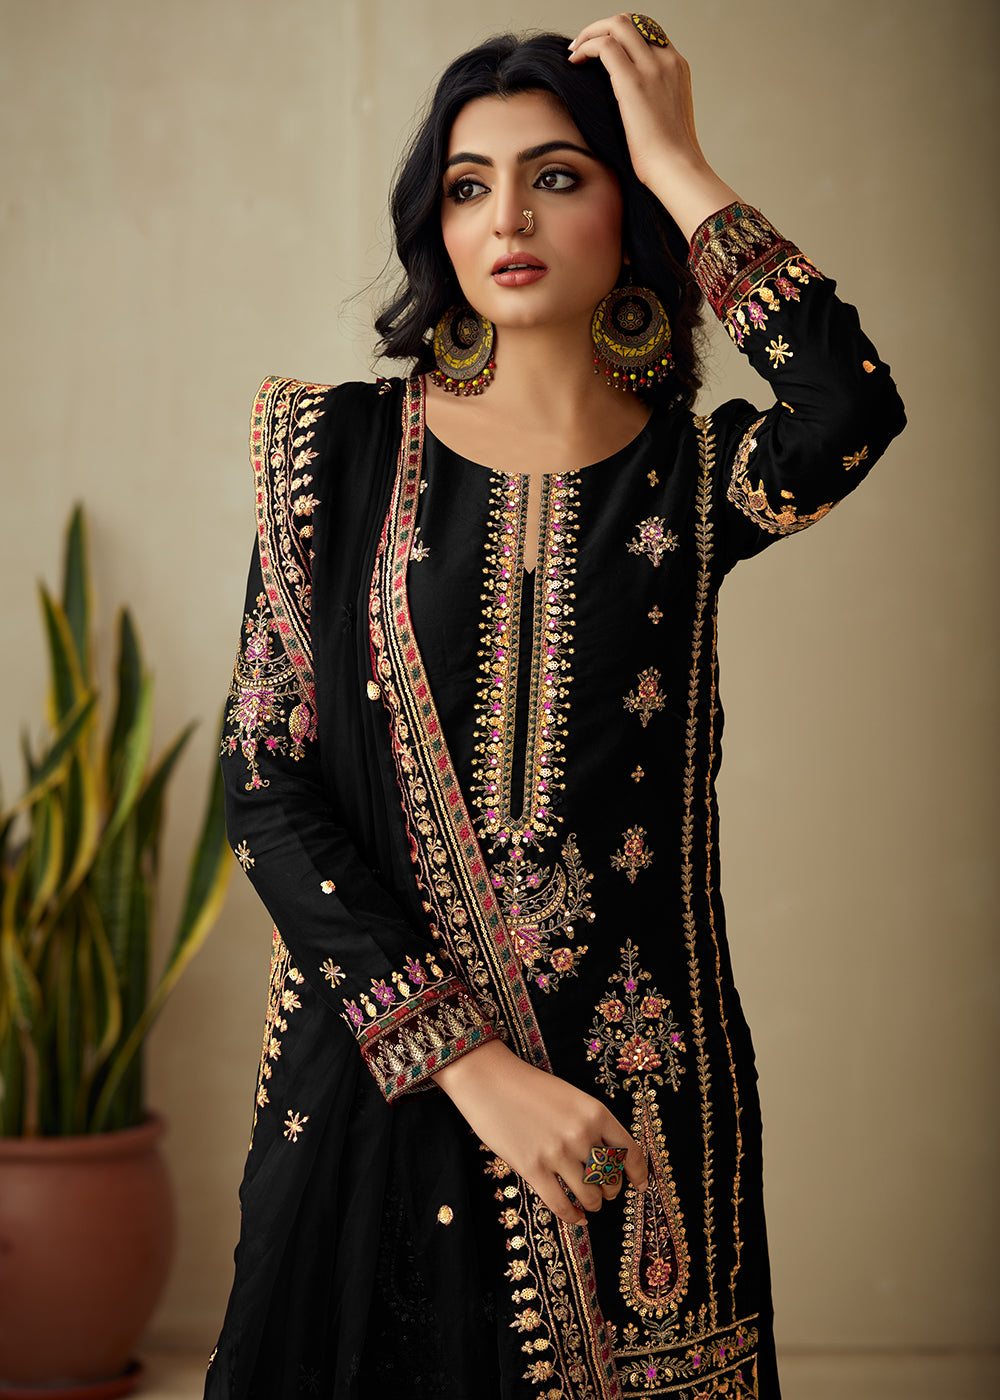 Buy Now Pure Black Organza Embroidered Traditional Salwar Kameez Online in USA, UK, Canada, Germany, Australia & Worldwide at Empress Clothing. 